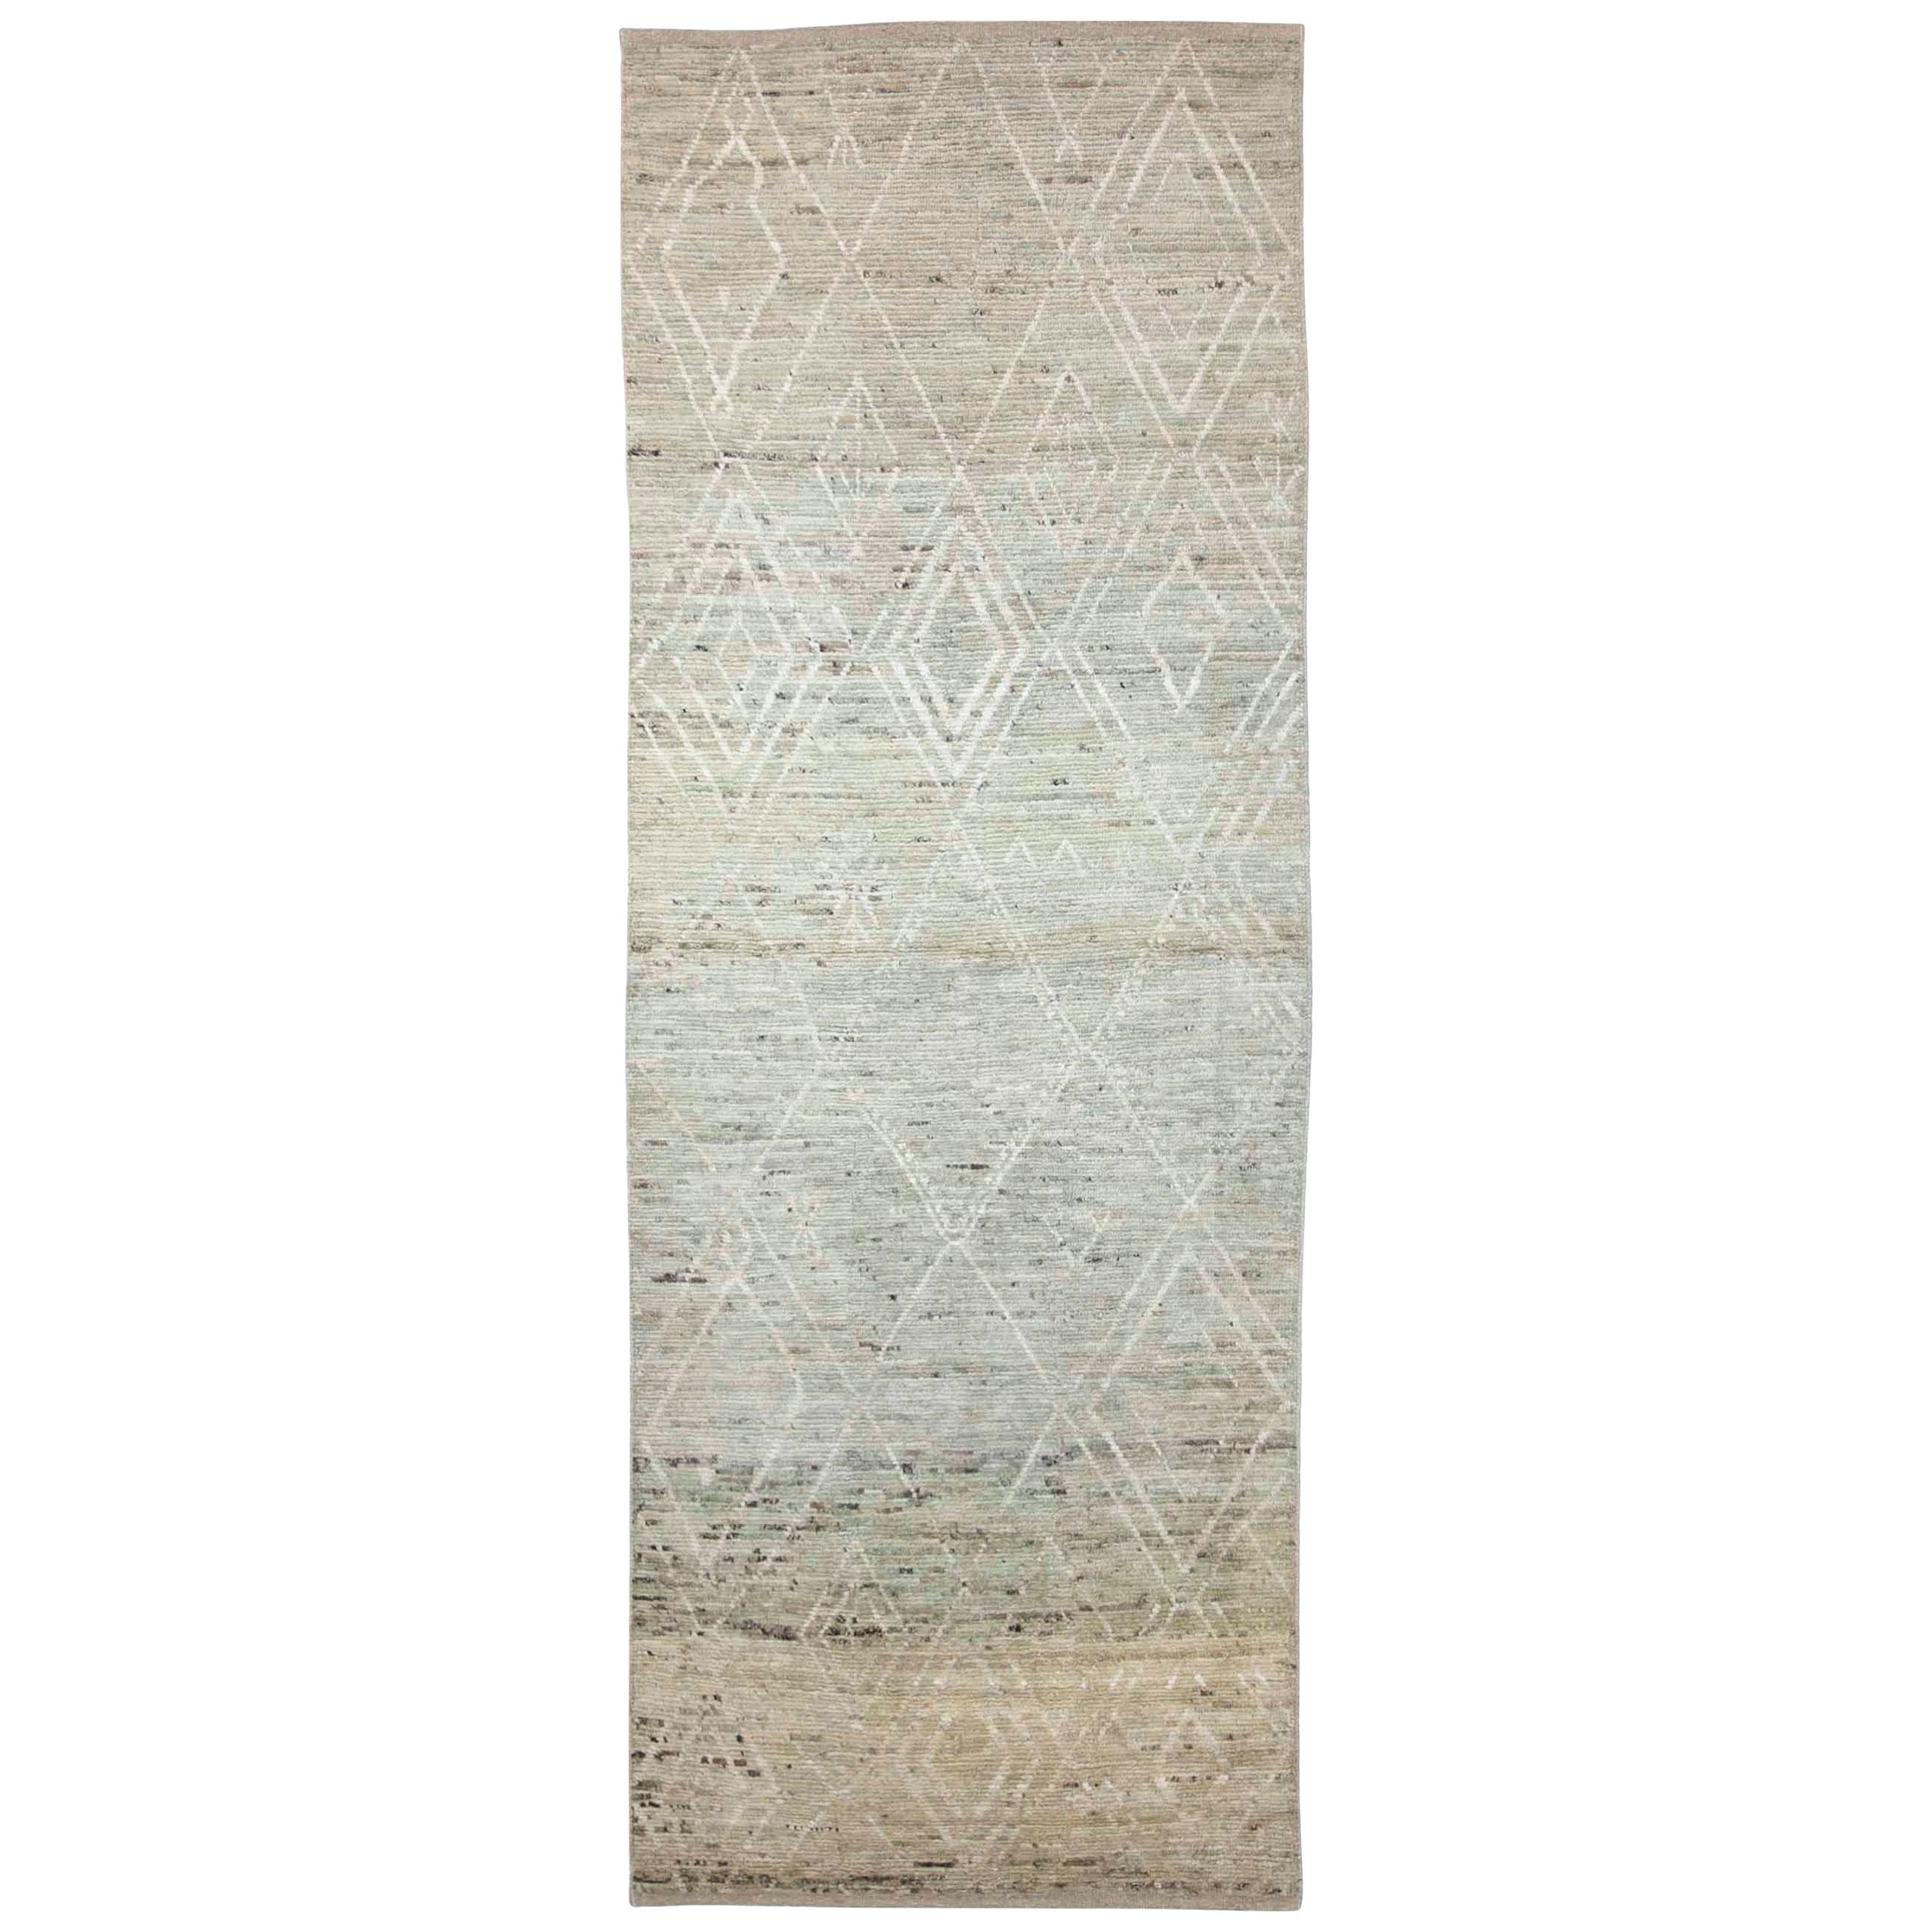 Afghan Moroccan Style Runner Rug with White Diamond Details on Beige Field For Sale